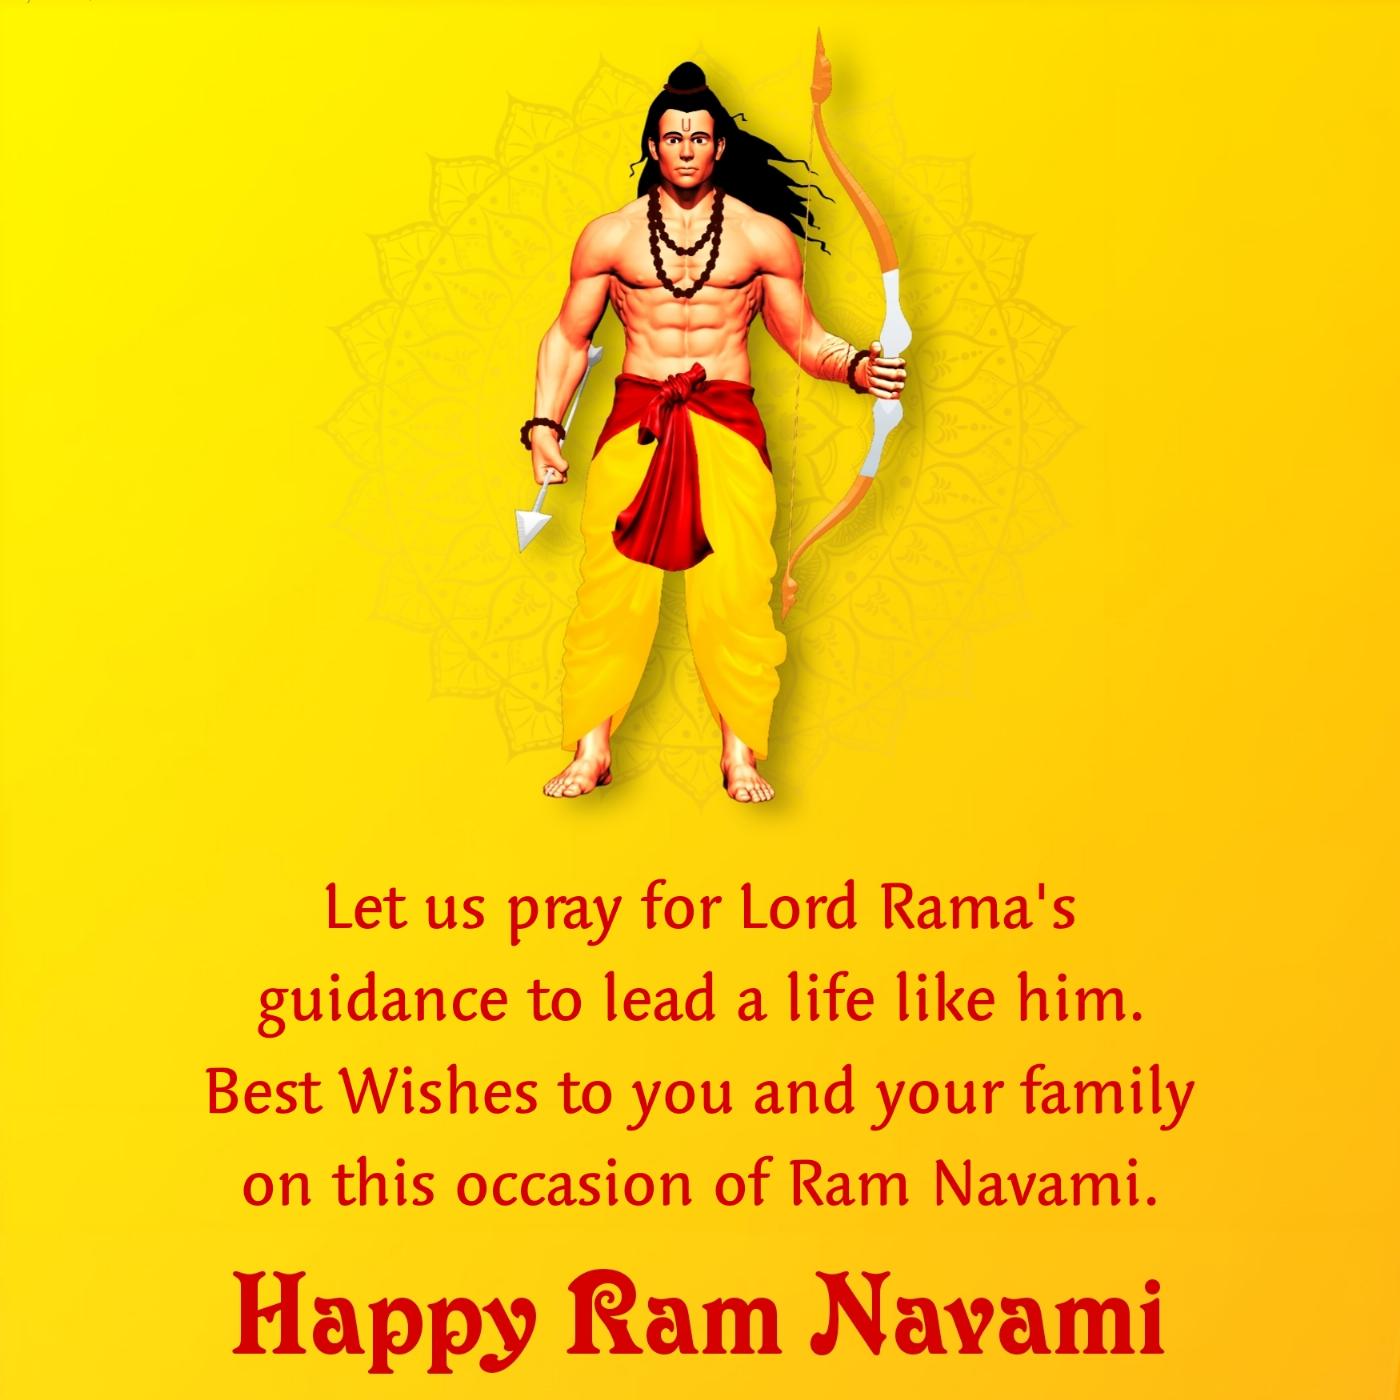 Let us pray for Lord Rama's guidance to lead a life like him